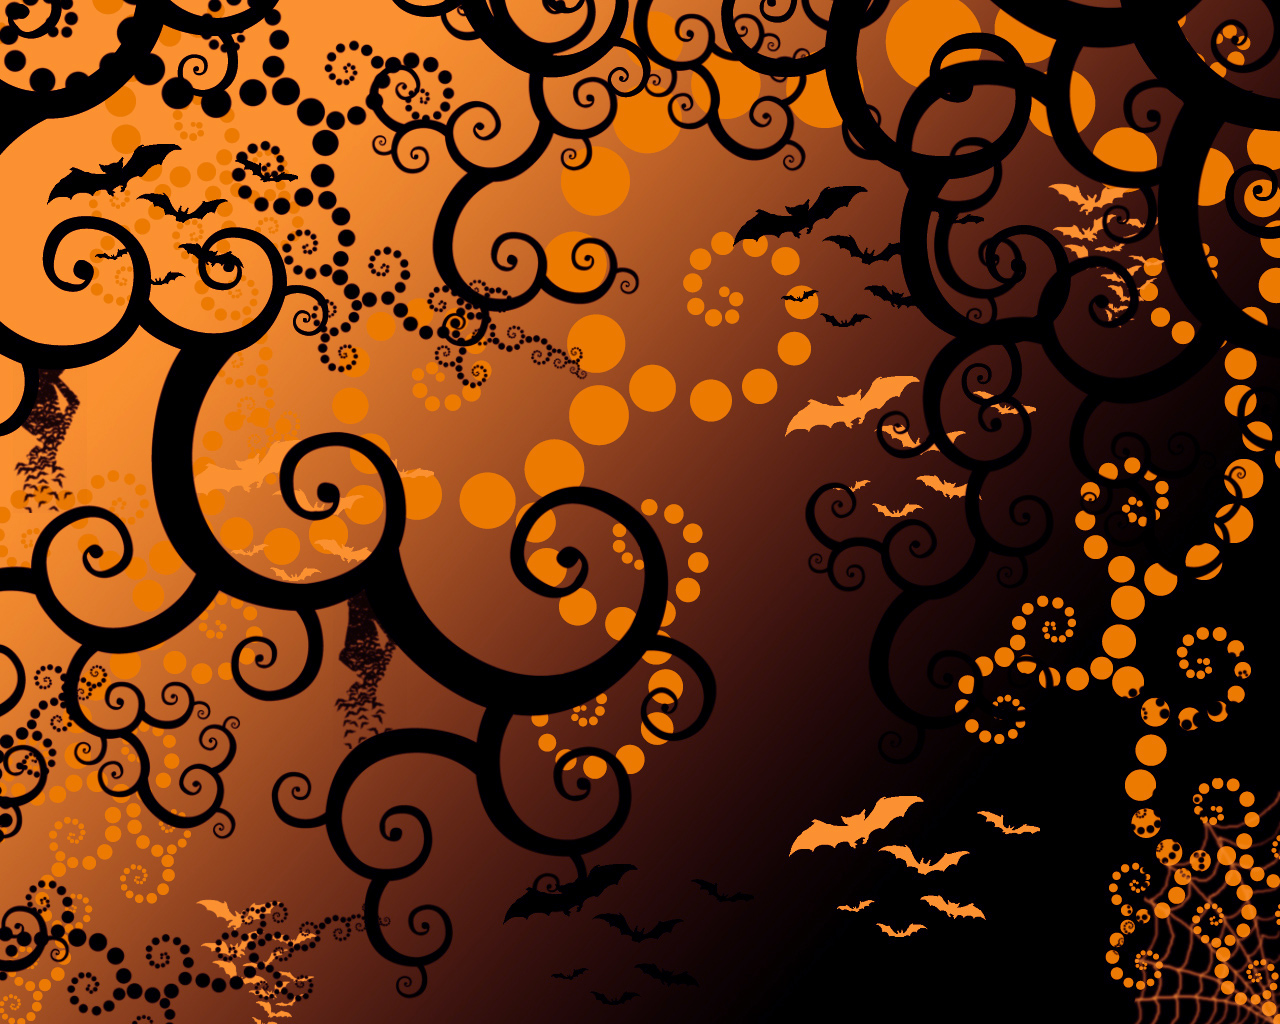 Wallpaper Roundup: All Hallow's Eve and Spooky Scenes